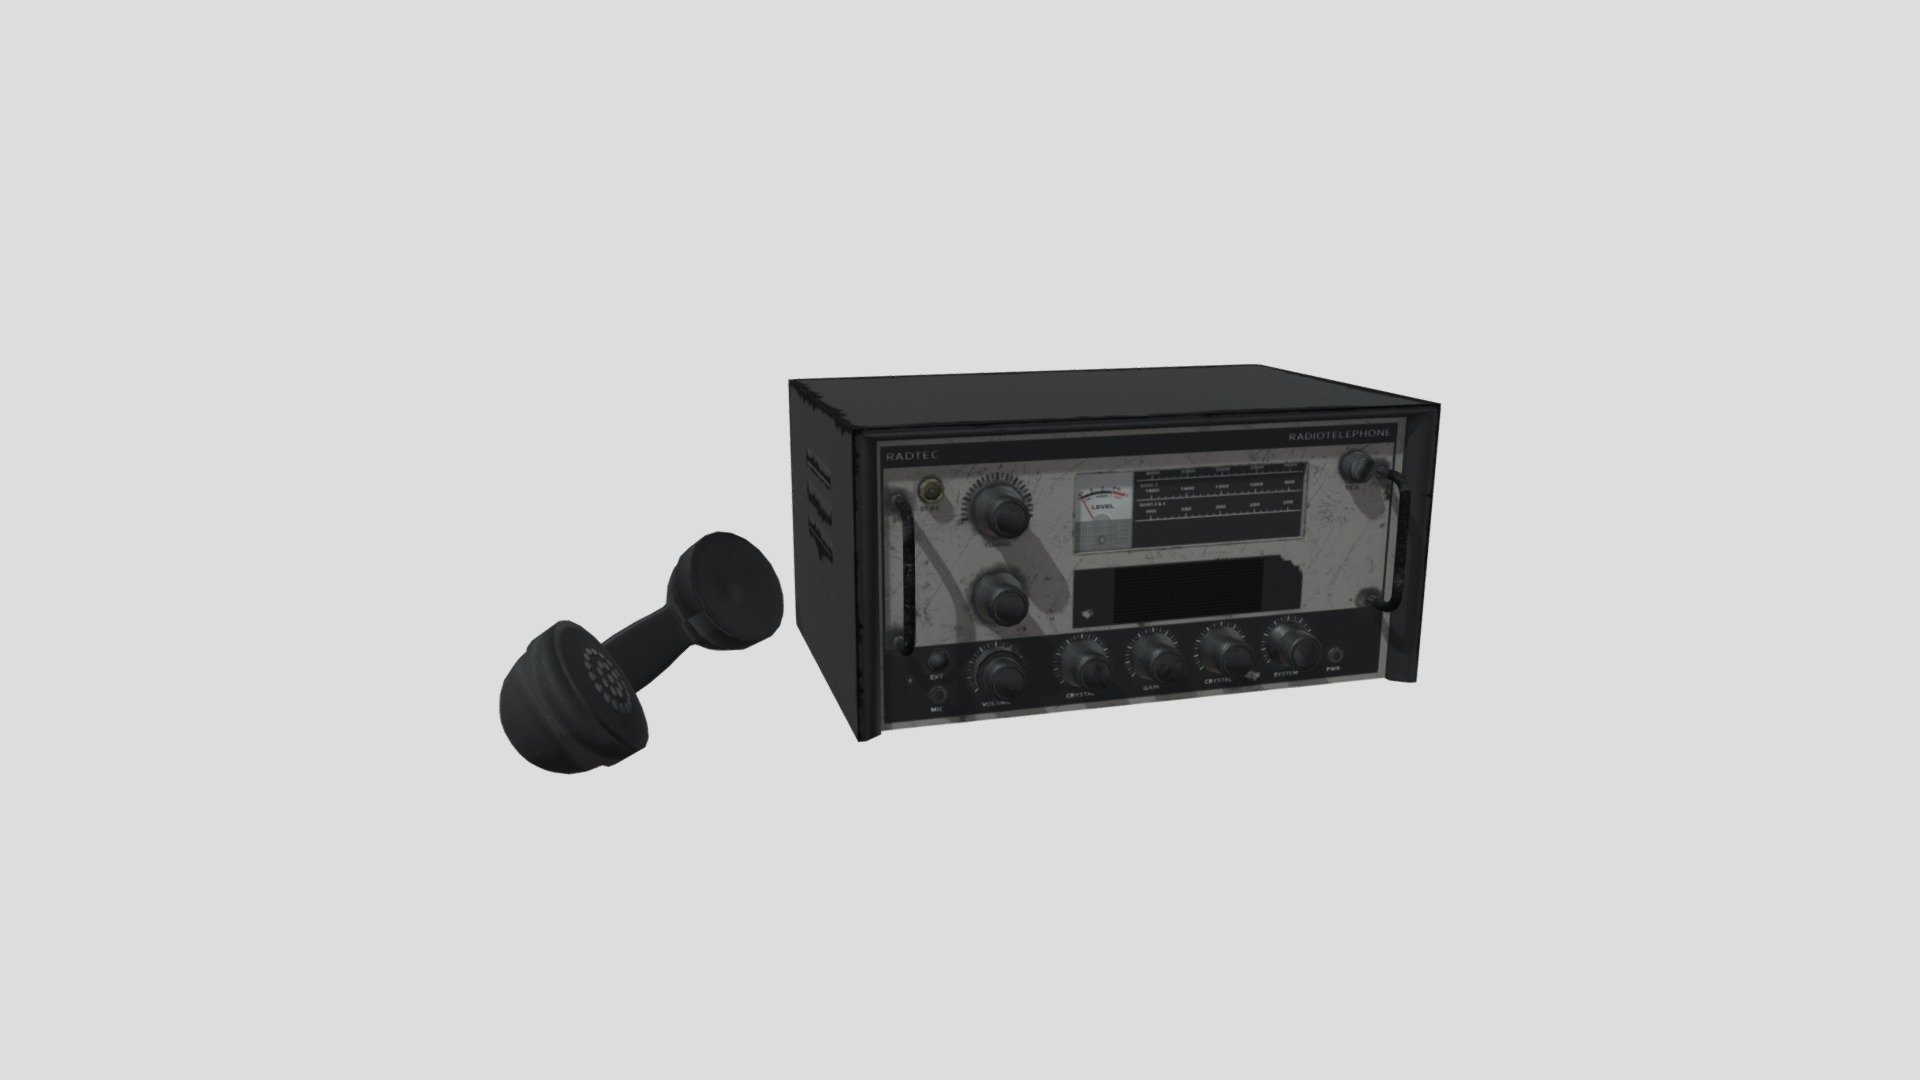 Game asset for a game I'm working on.
Modelled in Blender and textured using Quixel 2.0 - Old radio - 3D model by Skan 3d model